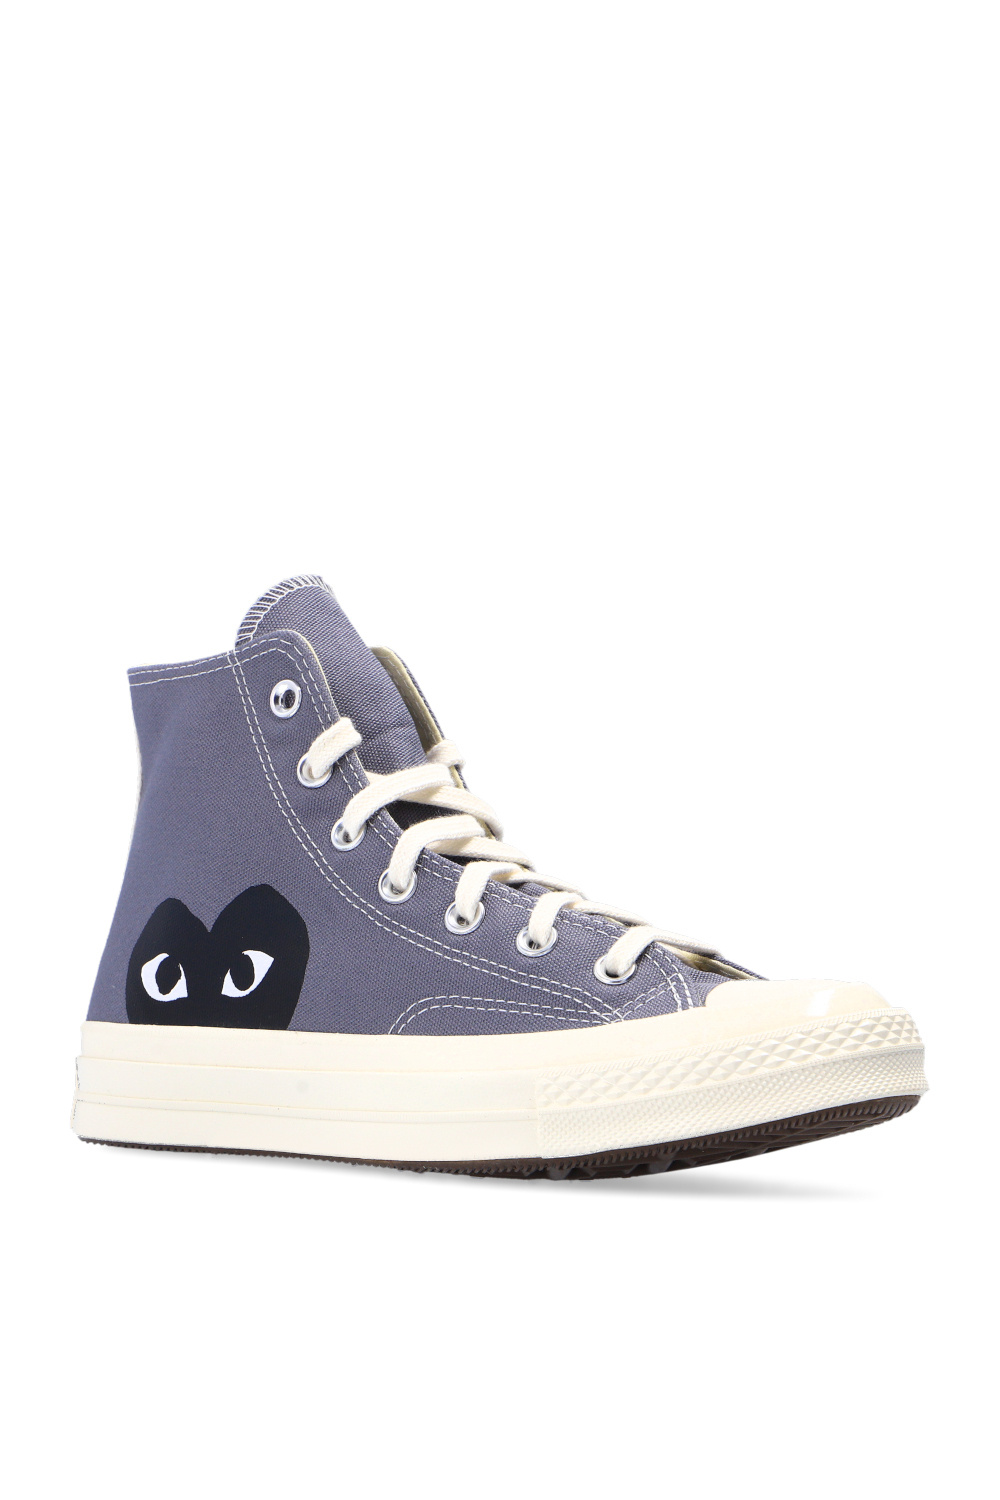 converse chuck 70 italian crafted dye pack converse chuck 70 italian crafted dye pack x Converse